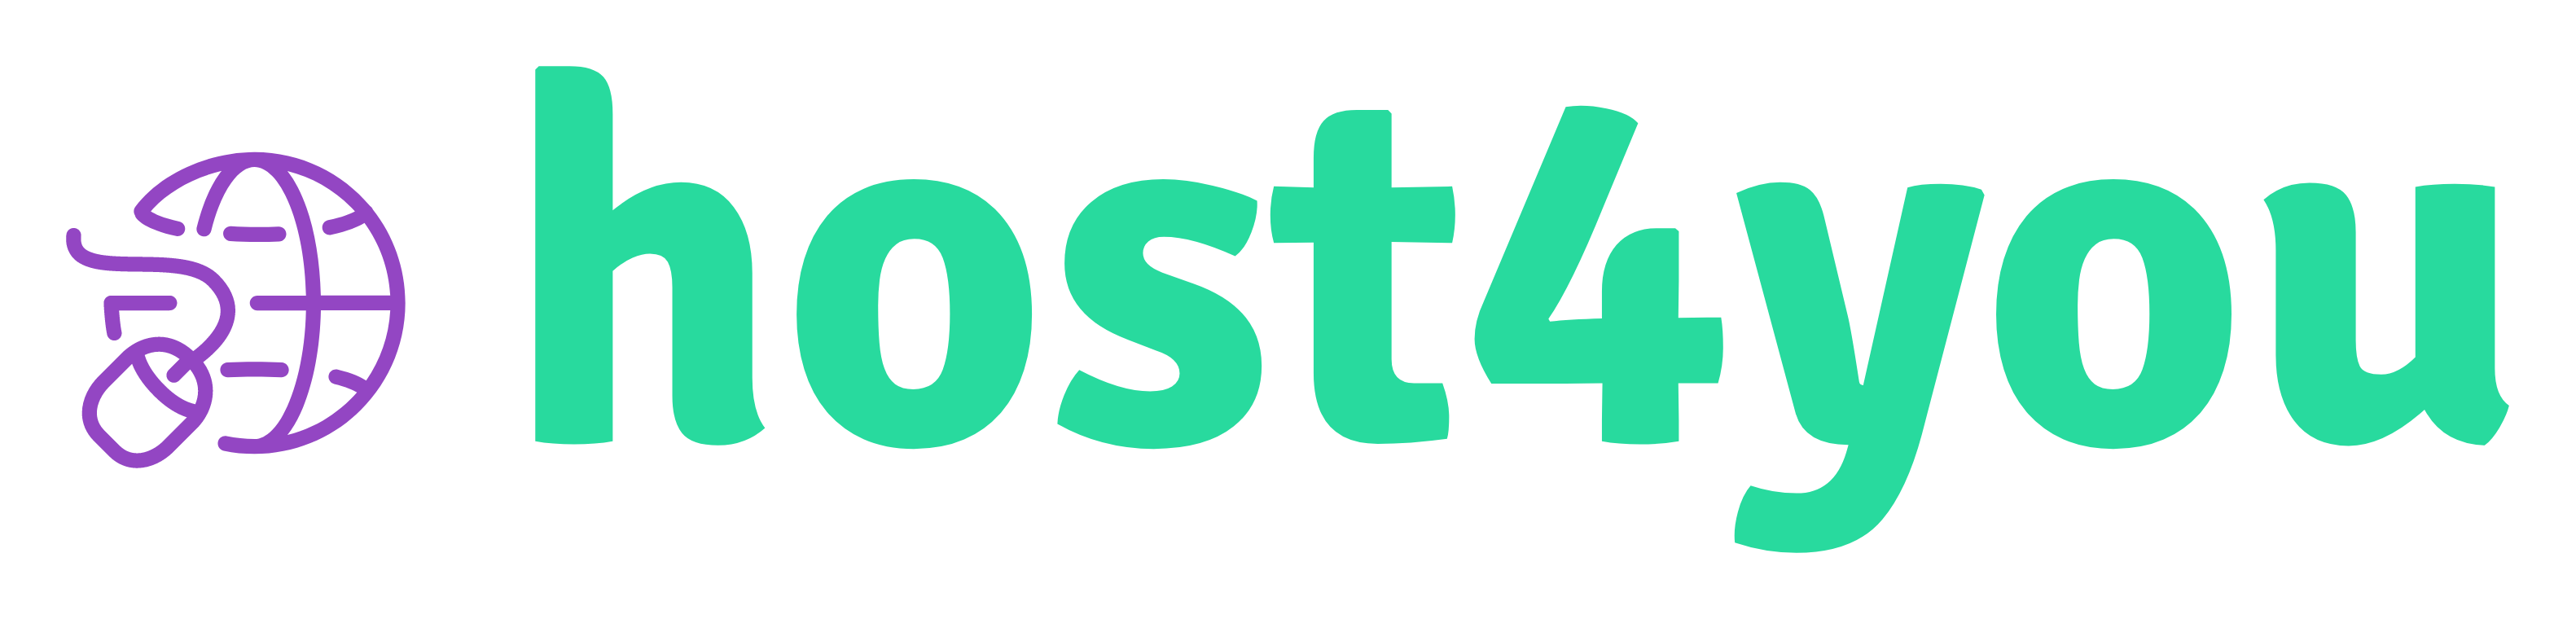 Host4You